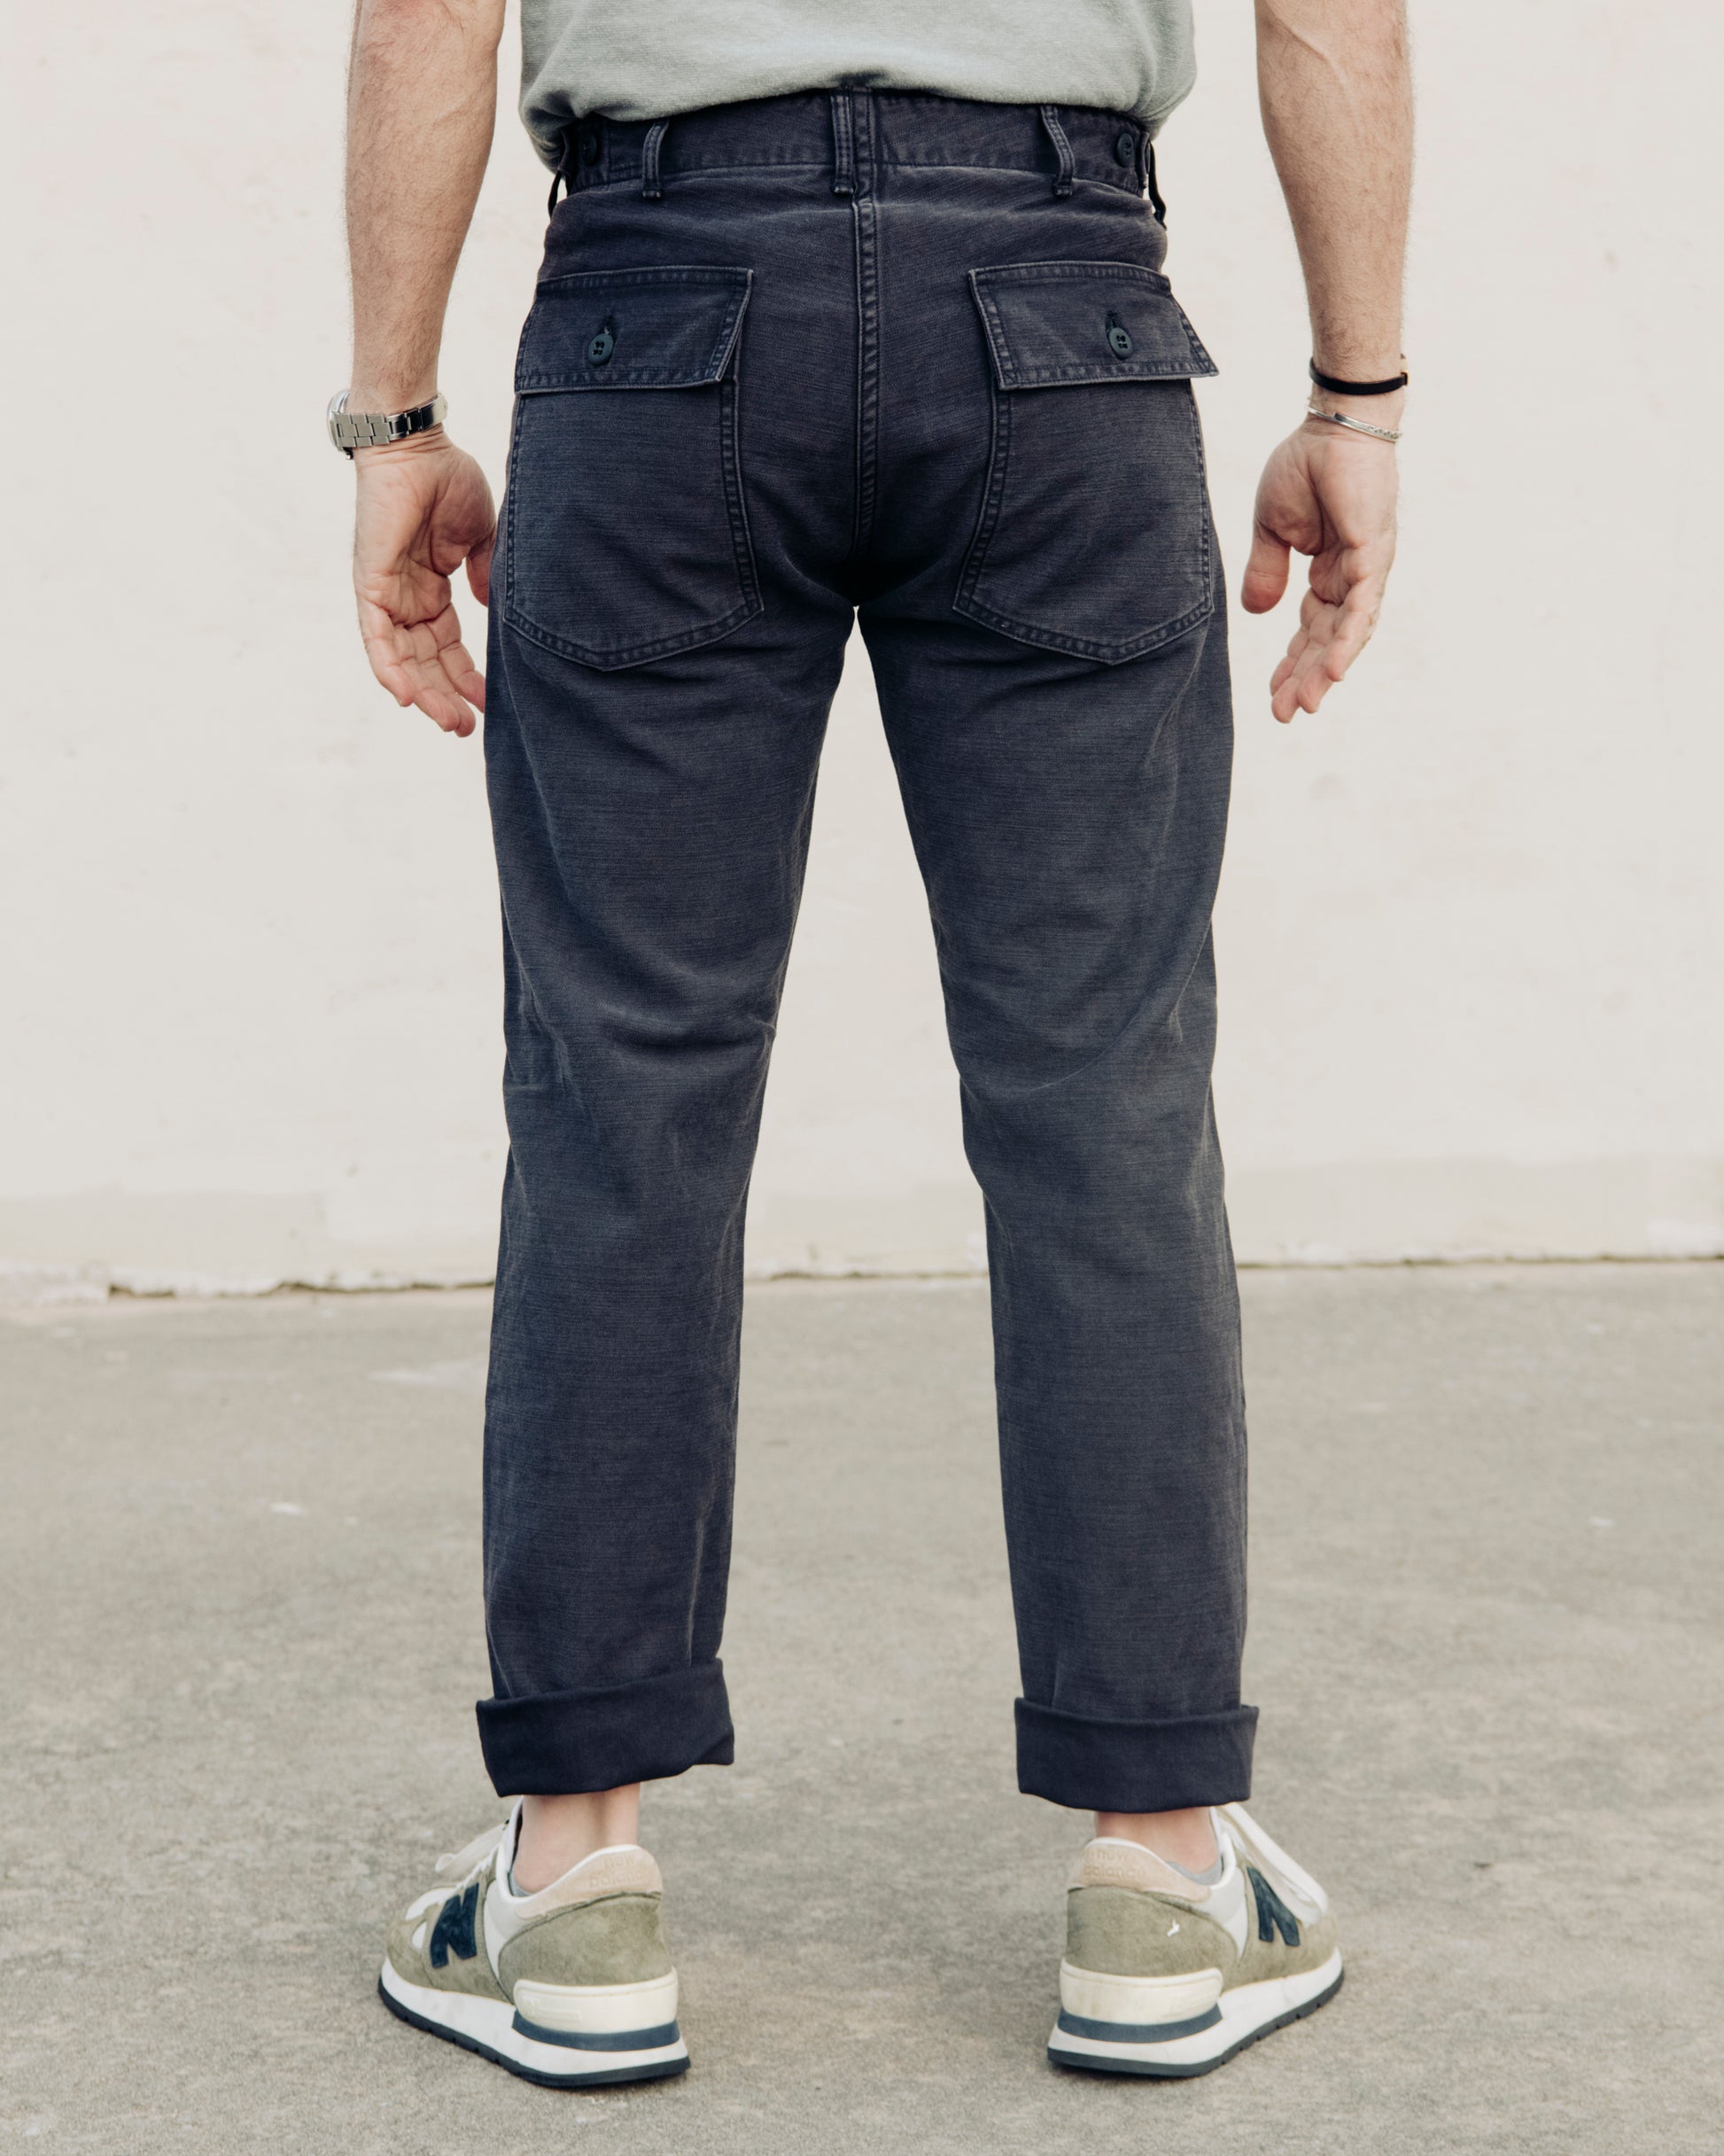 Orslow Fatigue Pant in Slim Cut – 22 Pcs by Man of the World